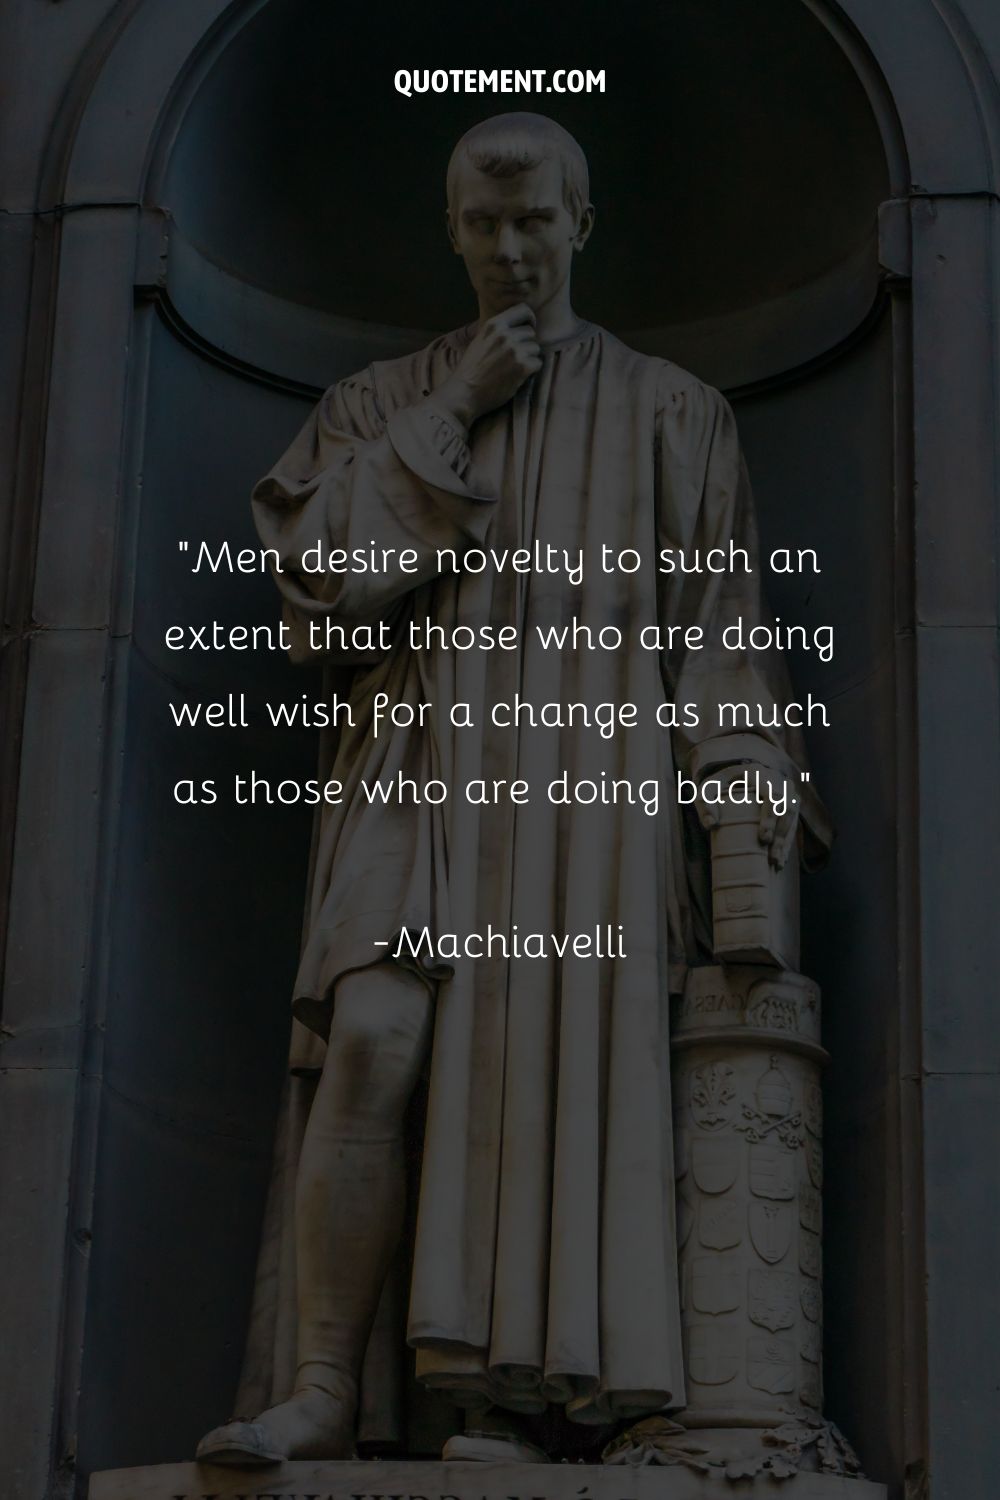 Men desire novelty to such an extent that those who are doing well wish for a change as much as those who are doing badly.